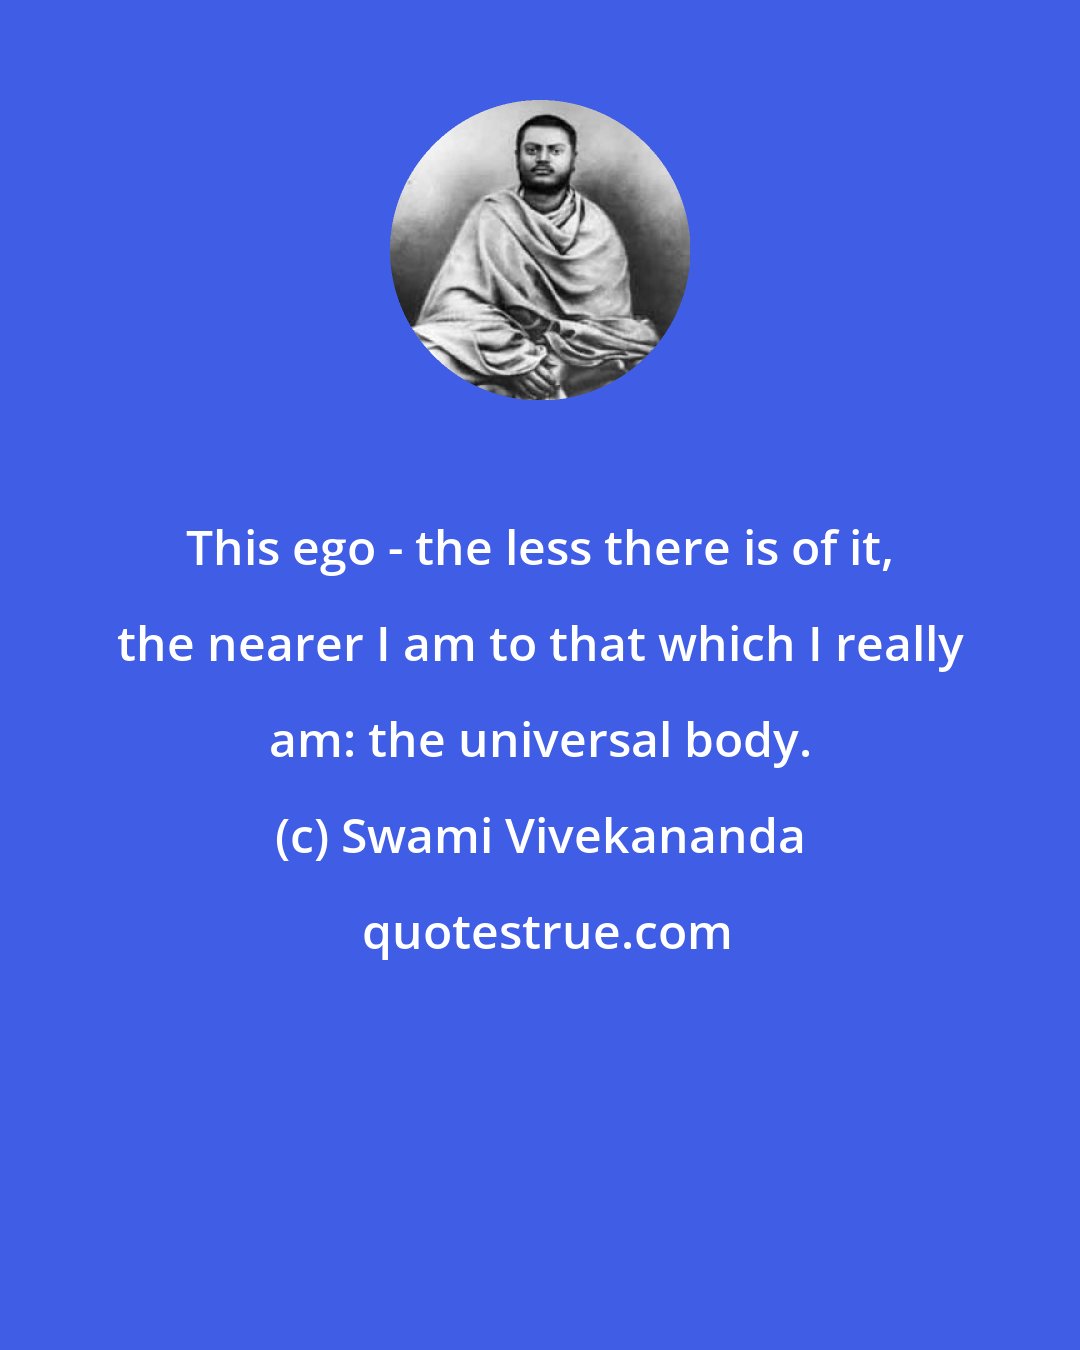 Swami Vivekananda: This ego - the less there is of it, the nearer I am to that which I really am: the universal body.